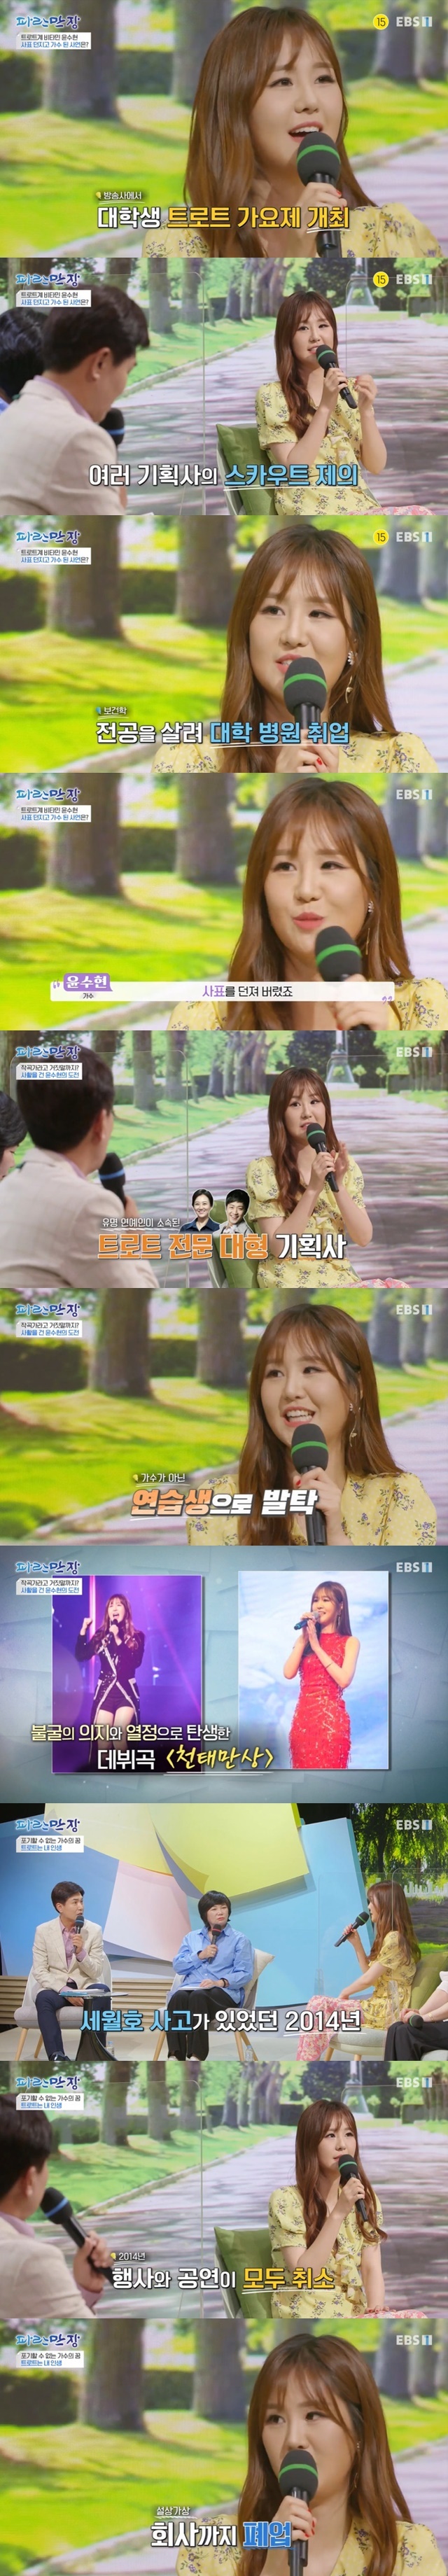 Singer yun su-hyun confessed the difficult debut story.TrotSinger Yun su-hyeun appeared on EBS 1TVs Life Story Blue Manjang, which aired on July 29.I was very nervous about becoming a singer, and I was not a major in arts and physical education, but I majored in health science, said Yun su-hyun.I was on the list. There was an agency proposal then, but the contract was too long.I thought it would be too difficult to know that it was not easy to get a song well. Yun su-hyun worked at the NTU Hospital Metro station, but it was hard to work, but he was stepping up while working as a guide and chorus part-timer. Eventually, he said, I thought I could not go back if I resigned and resigned.I will not do it, and I went to Singers way. There was opposition from the family, but I could not give up, so I went to the company where Jang Yoon-jung and Park Hyun-bin, who are most famous for Trot at the time, belonged.I made my own book, resume, portfolio, CD. I went to Topgol Park and did a survey. I went to work.I was a composer and I just went in and said I came to audition, and I just sang, and I danced hard because I was playing camcorders.I just sat down at the bridge and cried because I thought I was going to close my dream on my way back. I havent heard from him for three months.I had to go a different way in earnest, but I got a phone call to the number I did not know.I was happy to cry while running crazy in the city, he said, saying that he received a call to pass the audition in three months.After a year of debuting his first car to work and to work in the last train, he was soon destroyed. As a result of the 2014 disaster, all events were canceled.The first time I called it a Cheontaemansang at K headquarters, it happened the next day.I thought my mother Faather was your way, but I couldnt give up, so I worked alone for about six months.